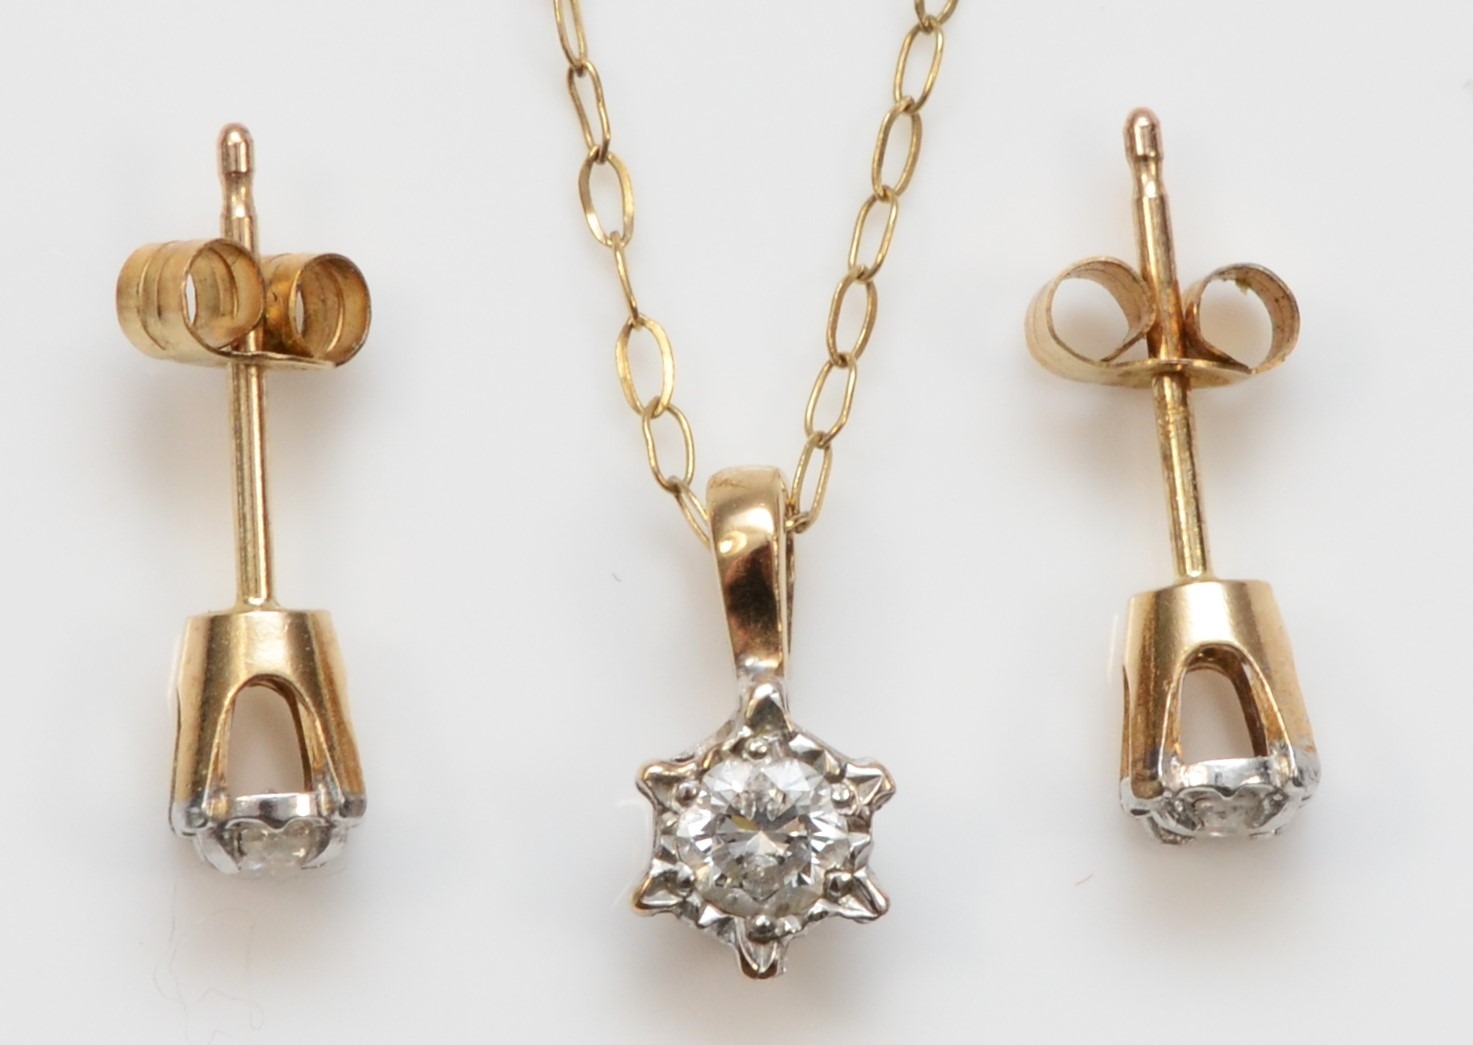 A 9ct gold brilliant cut diamond pendant, on 375 gold chain, together with a pair of 10k gold